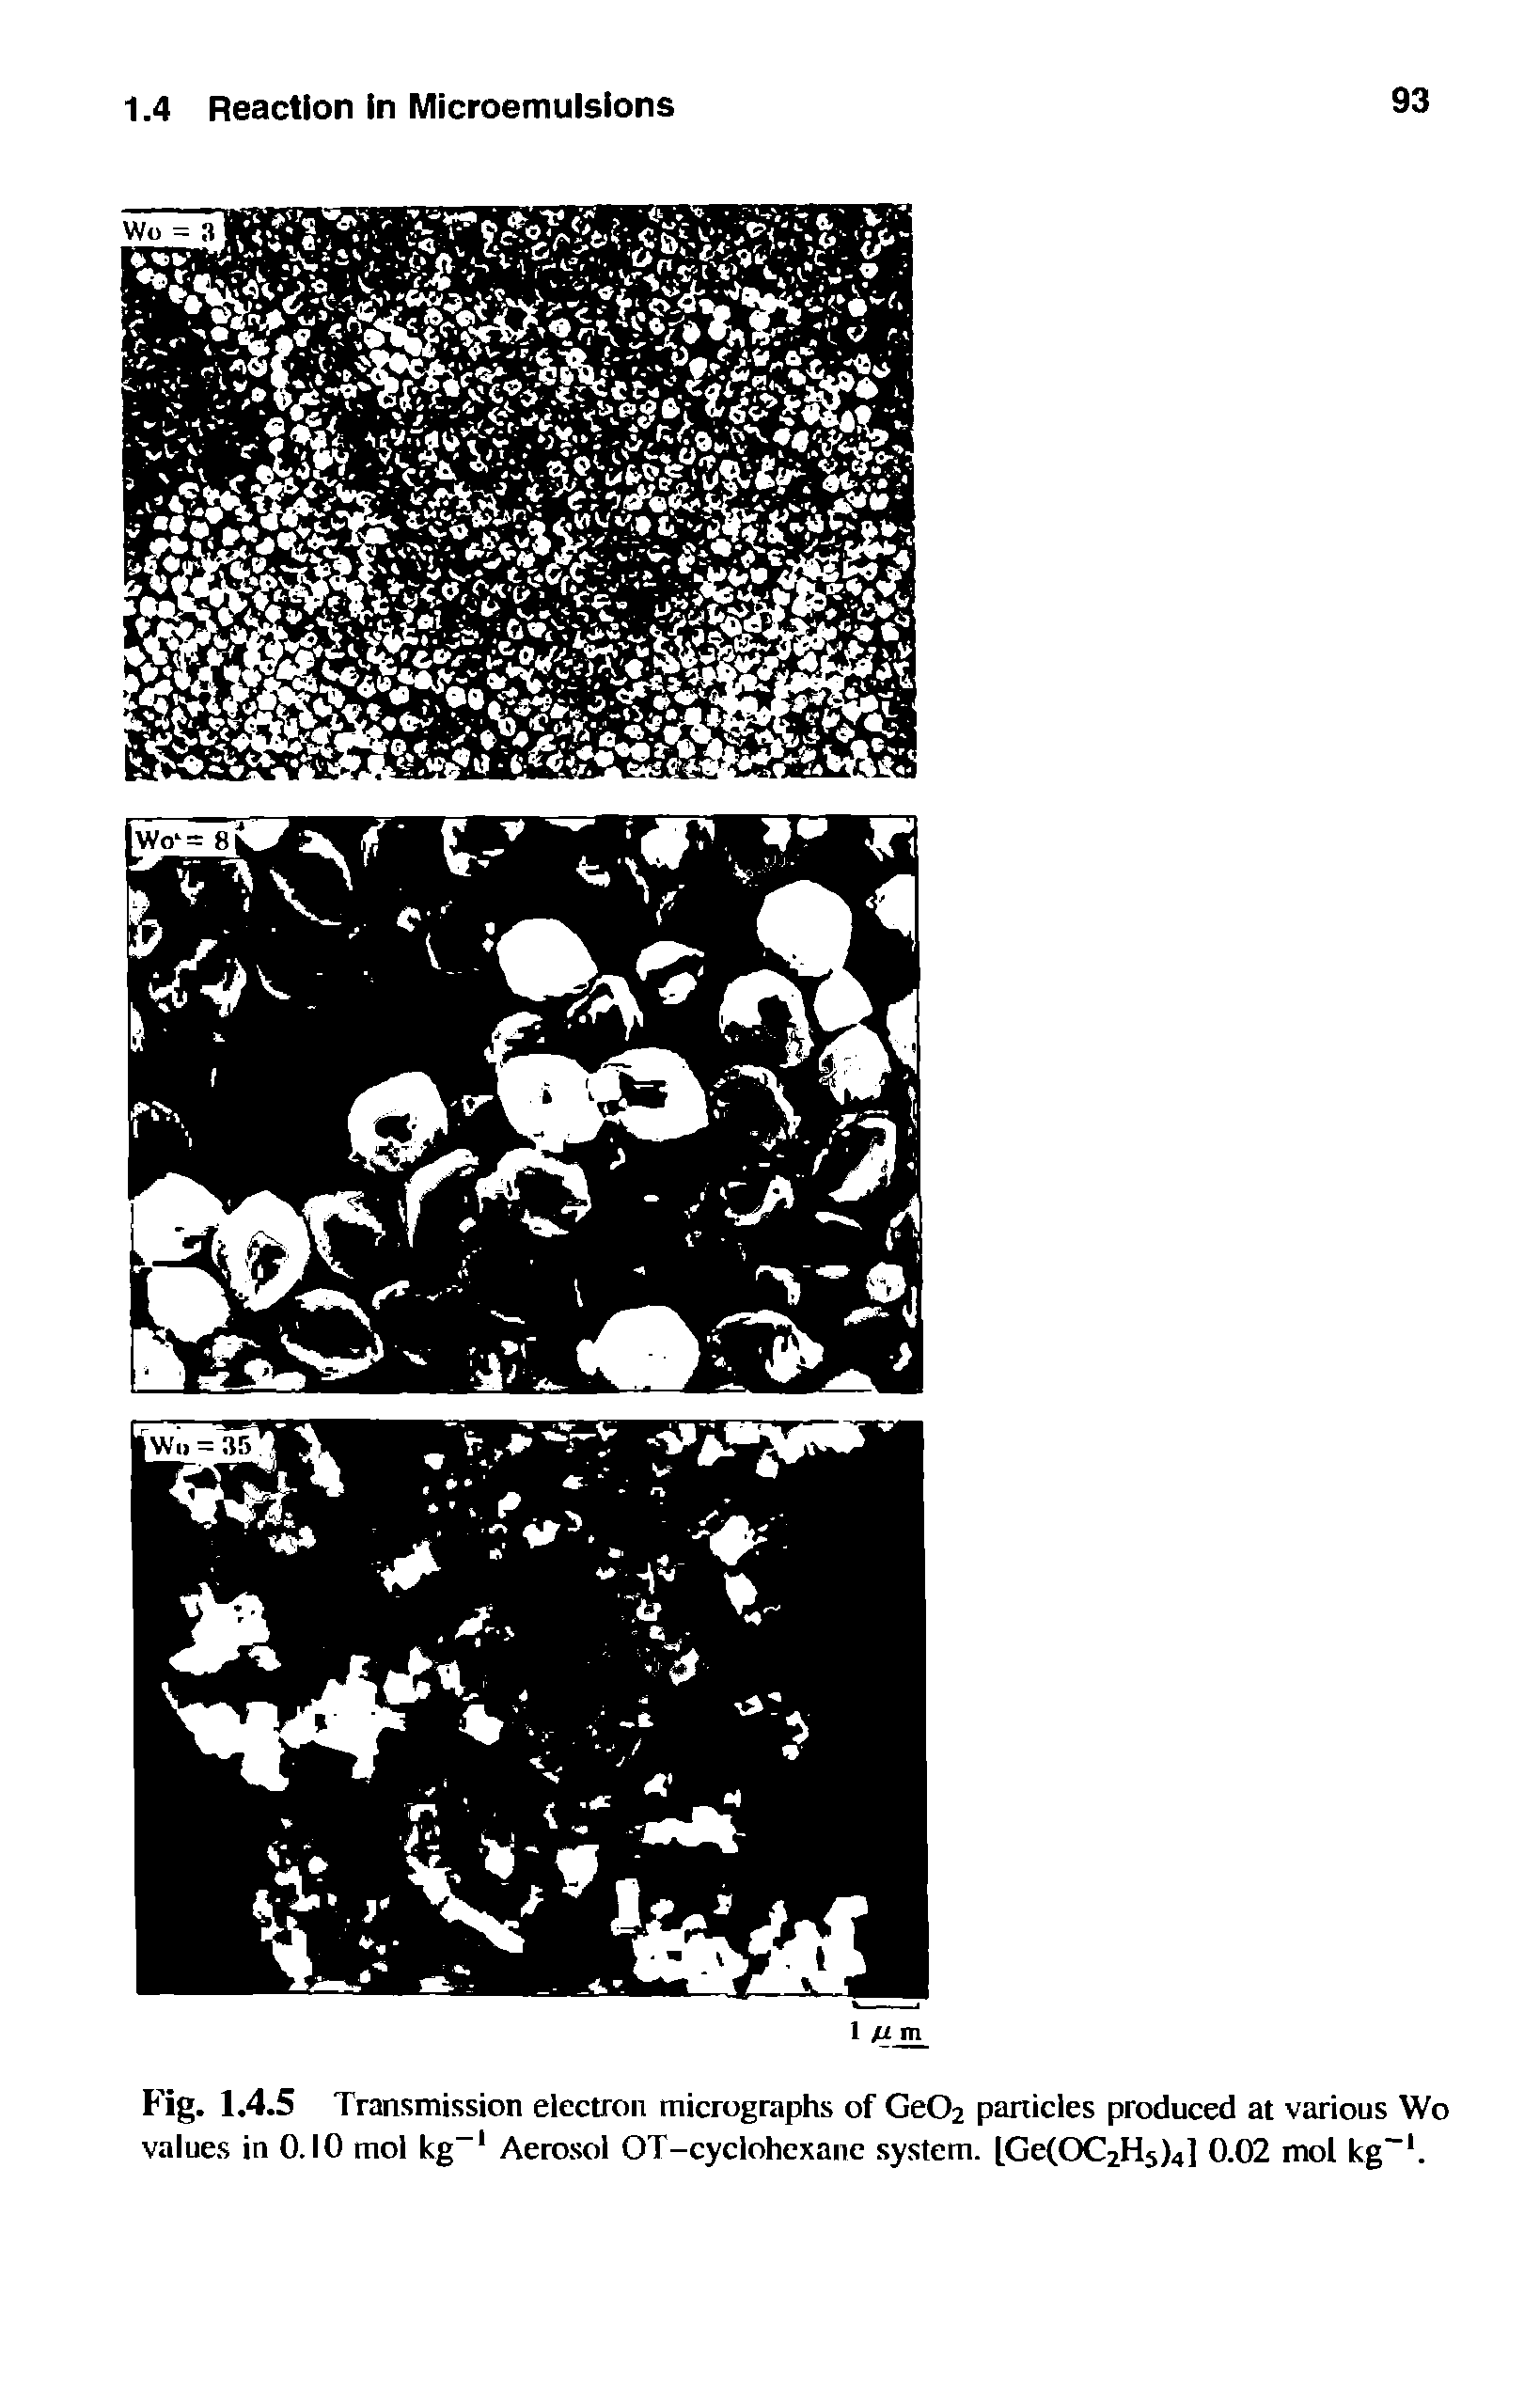 Fig. 1.4.5 Transmission electron micrographs of Ge02 panicles produced at various Wo values in 0.10 mol kg-1 Aerosol OT-cyclohexane system. Ge(OC2H5)4] 0.02 mol kg-1.